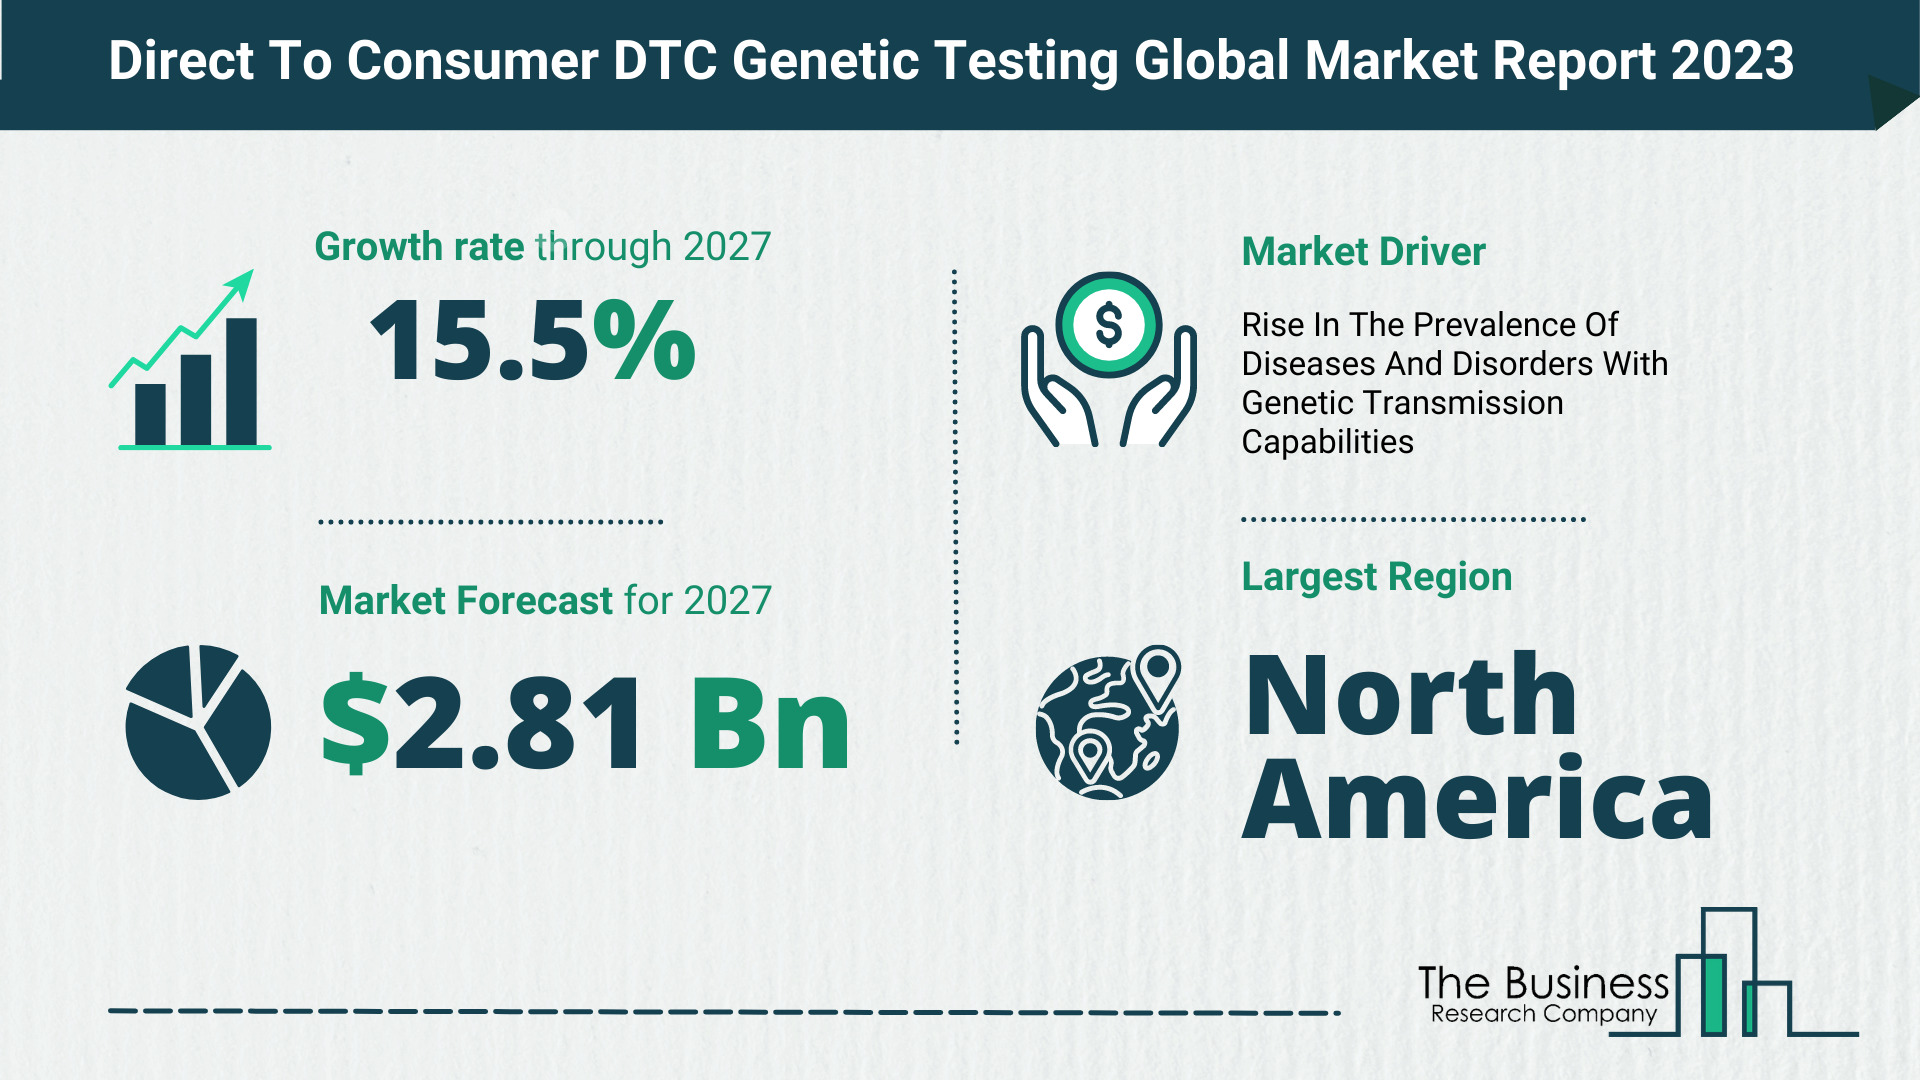 How Will The Direct To Consumer DTC Genetic Testing Market Globally Expand In 2023?